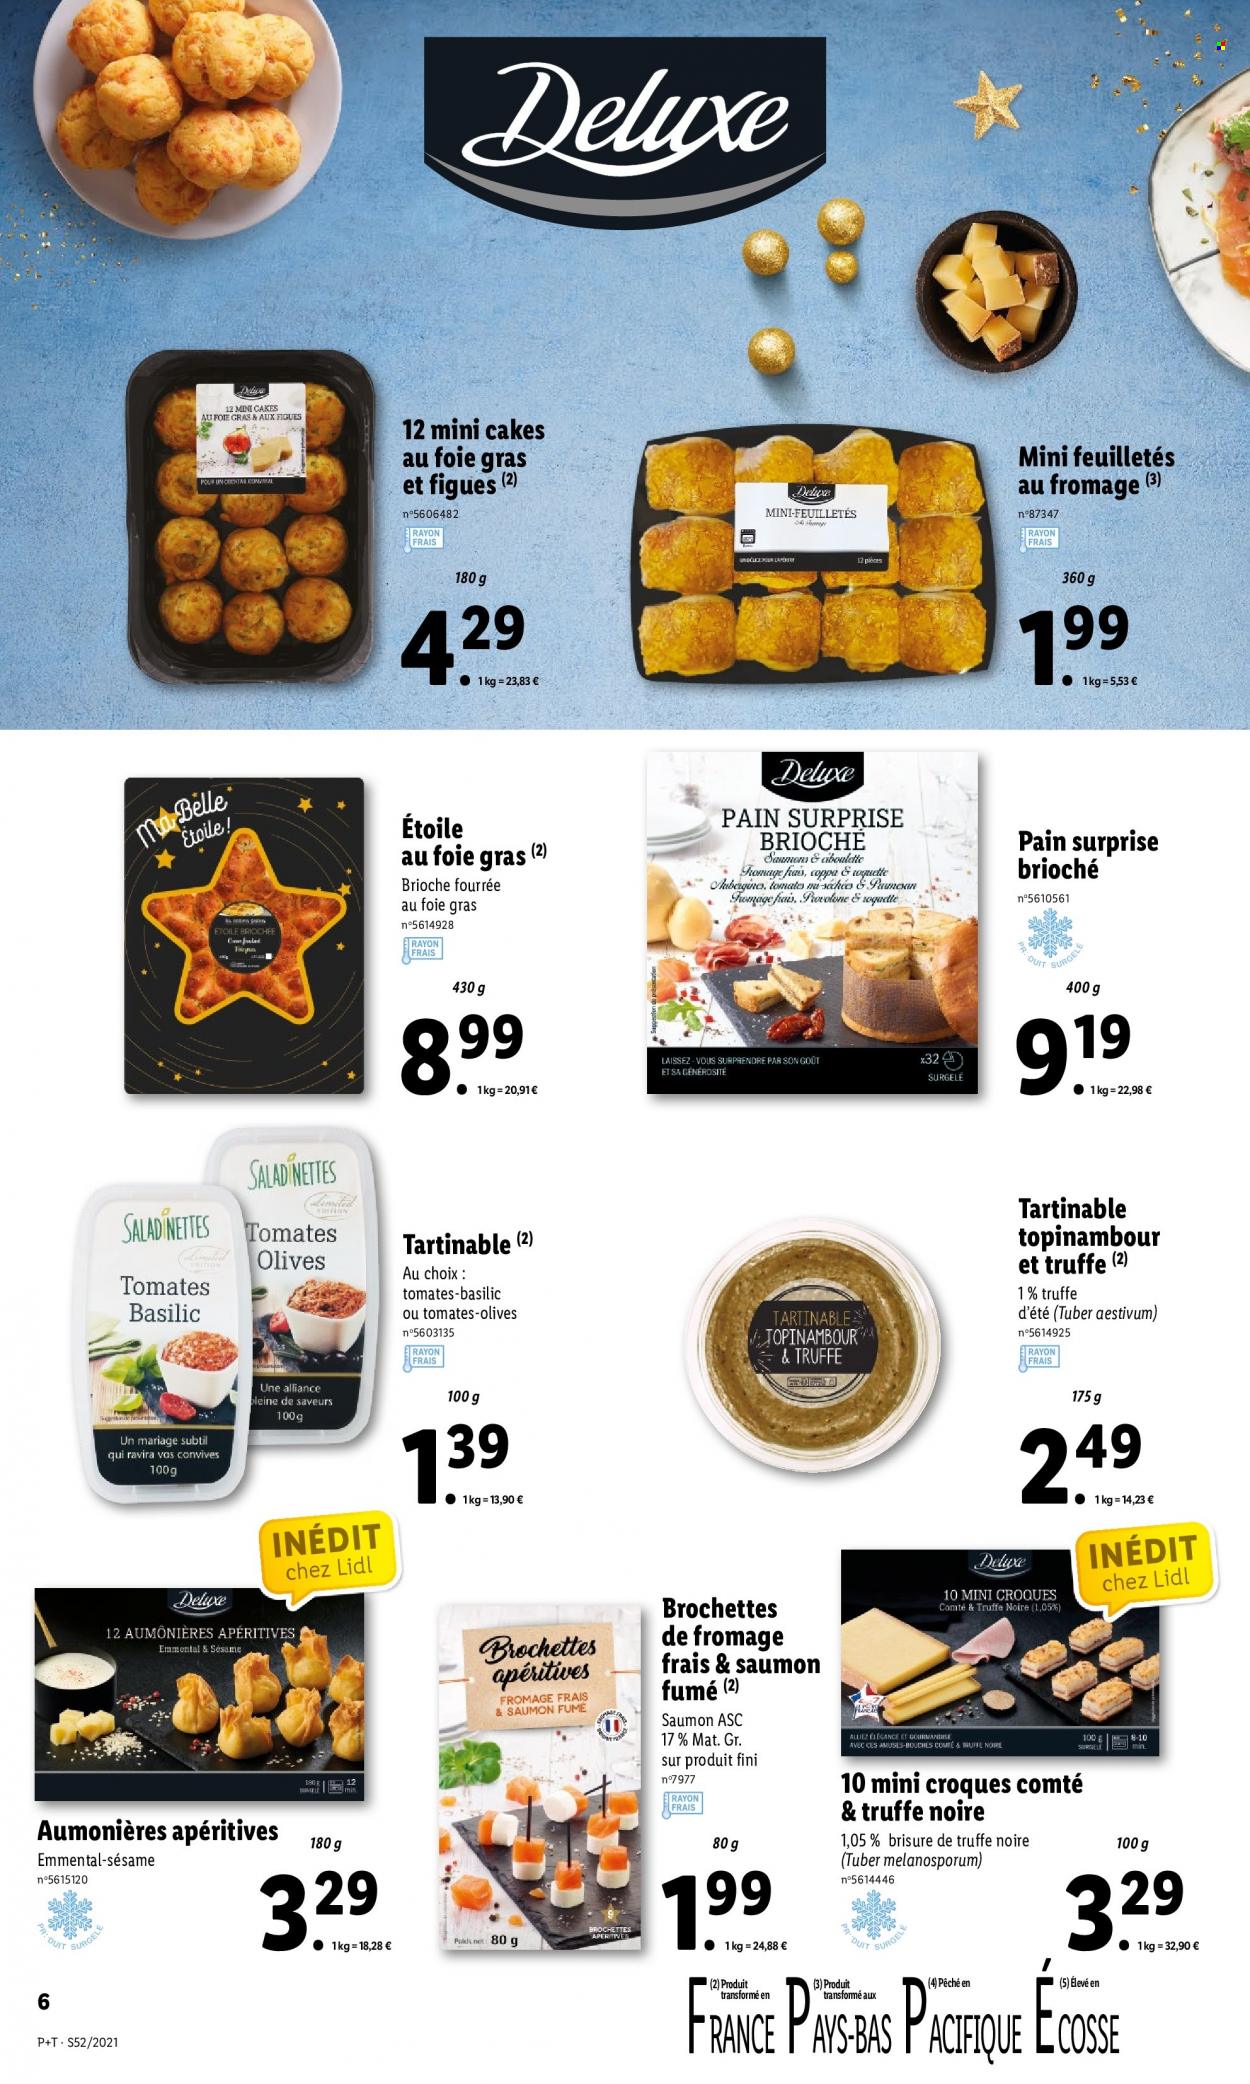 Catalogue Lidl - 29.12.2021 - 04.01.2022. Page 6.